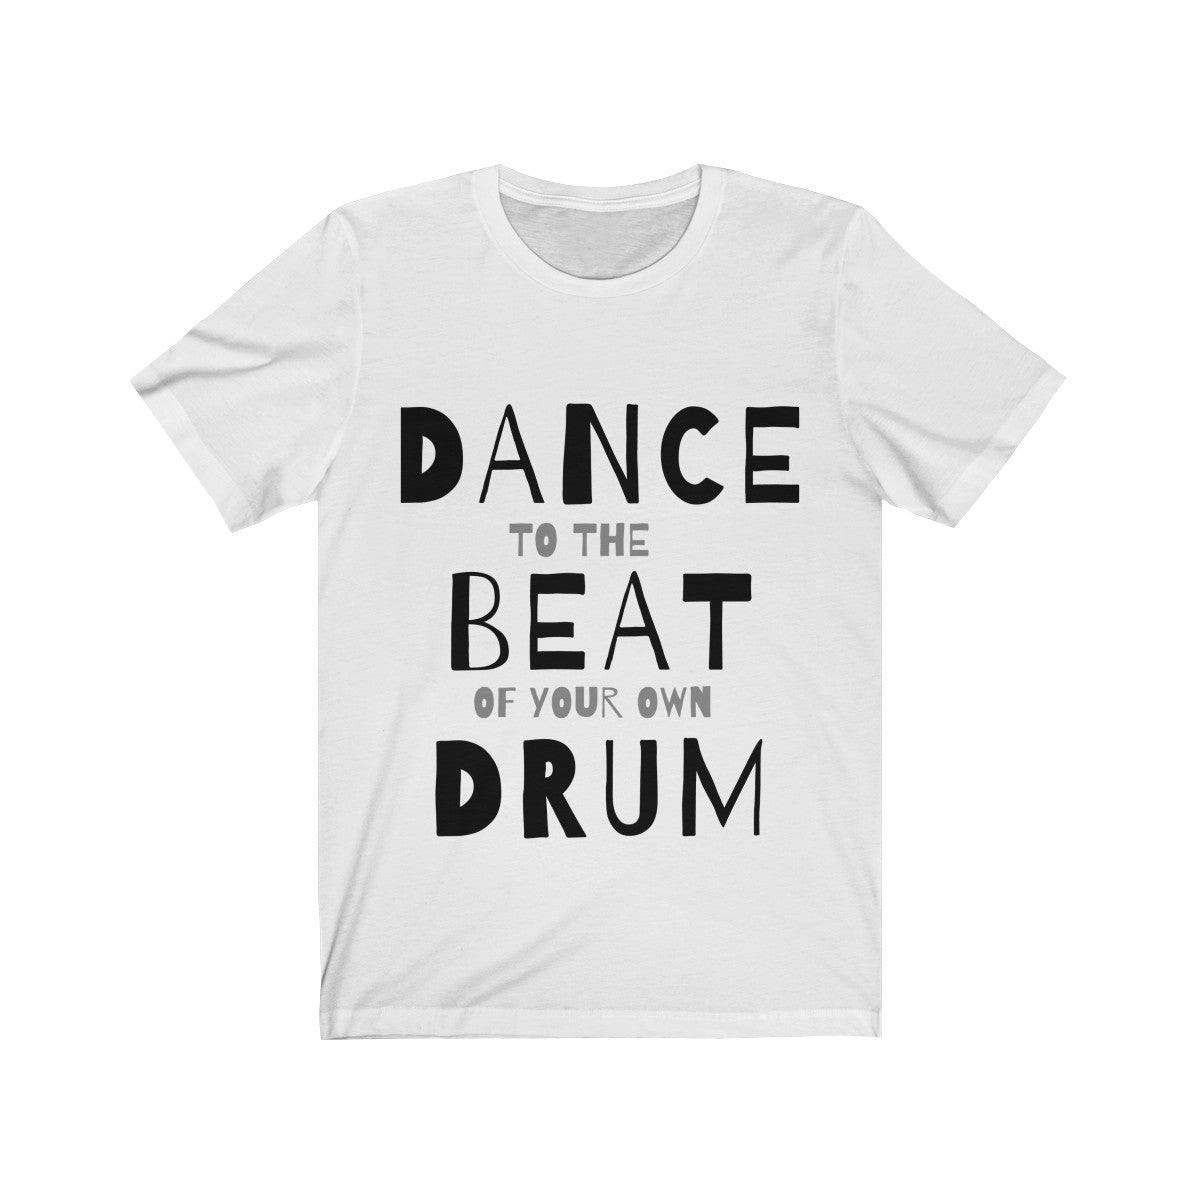 Dance to the beat - SD-style-shop